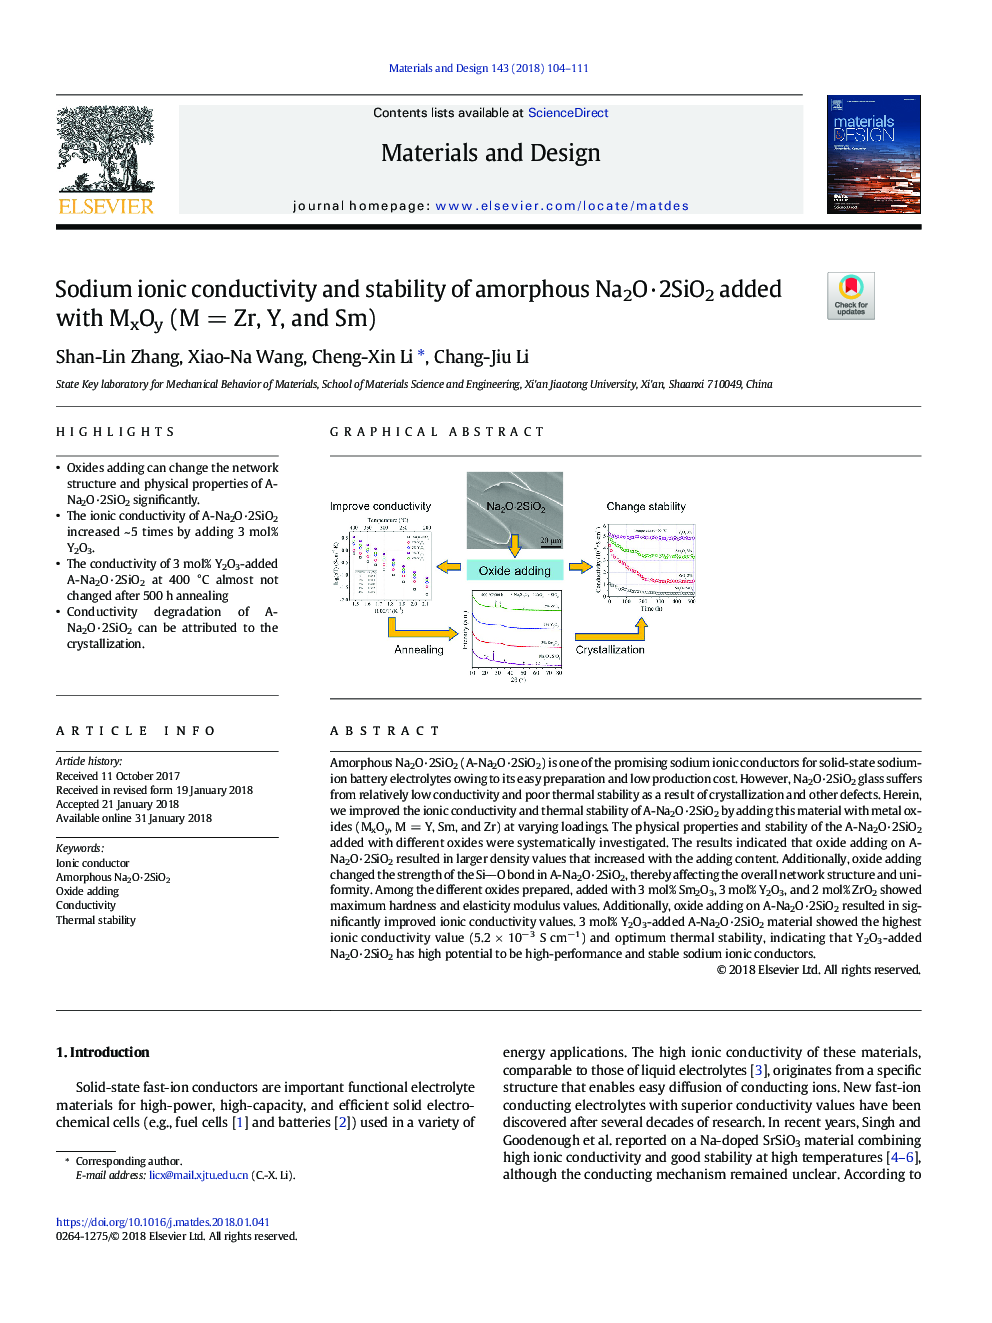 Sodium ionic conductivity and stability of amorphous Na2OÂ·2SiO2 added with MxOy (MÂ =Â Zr, Y, and Sm)